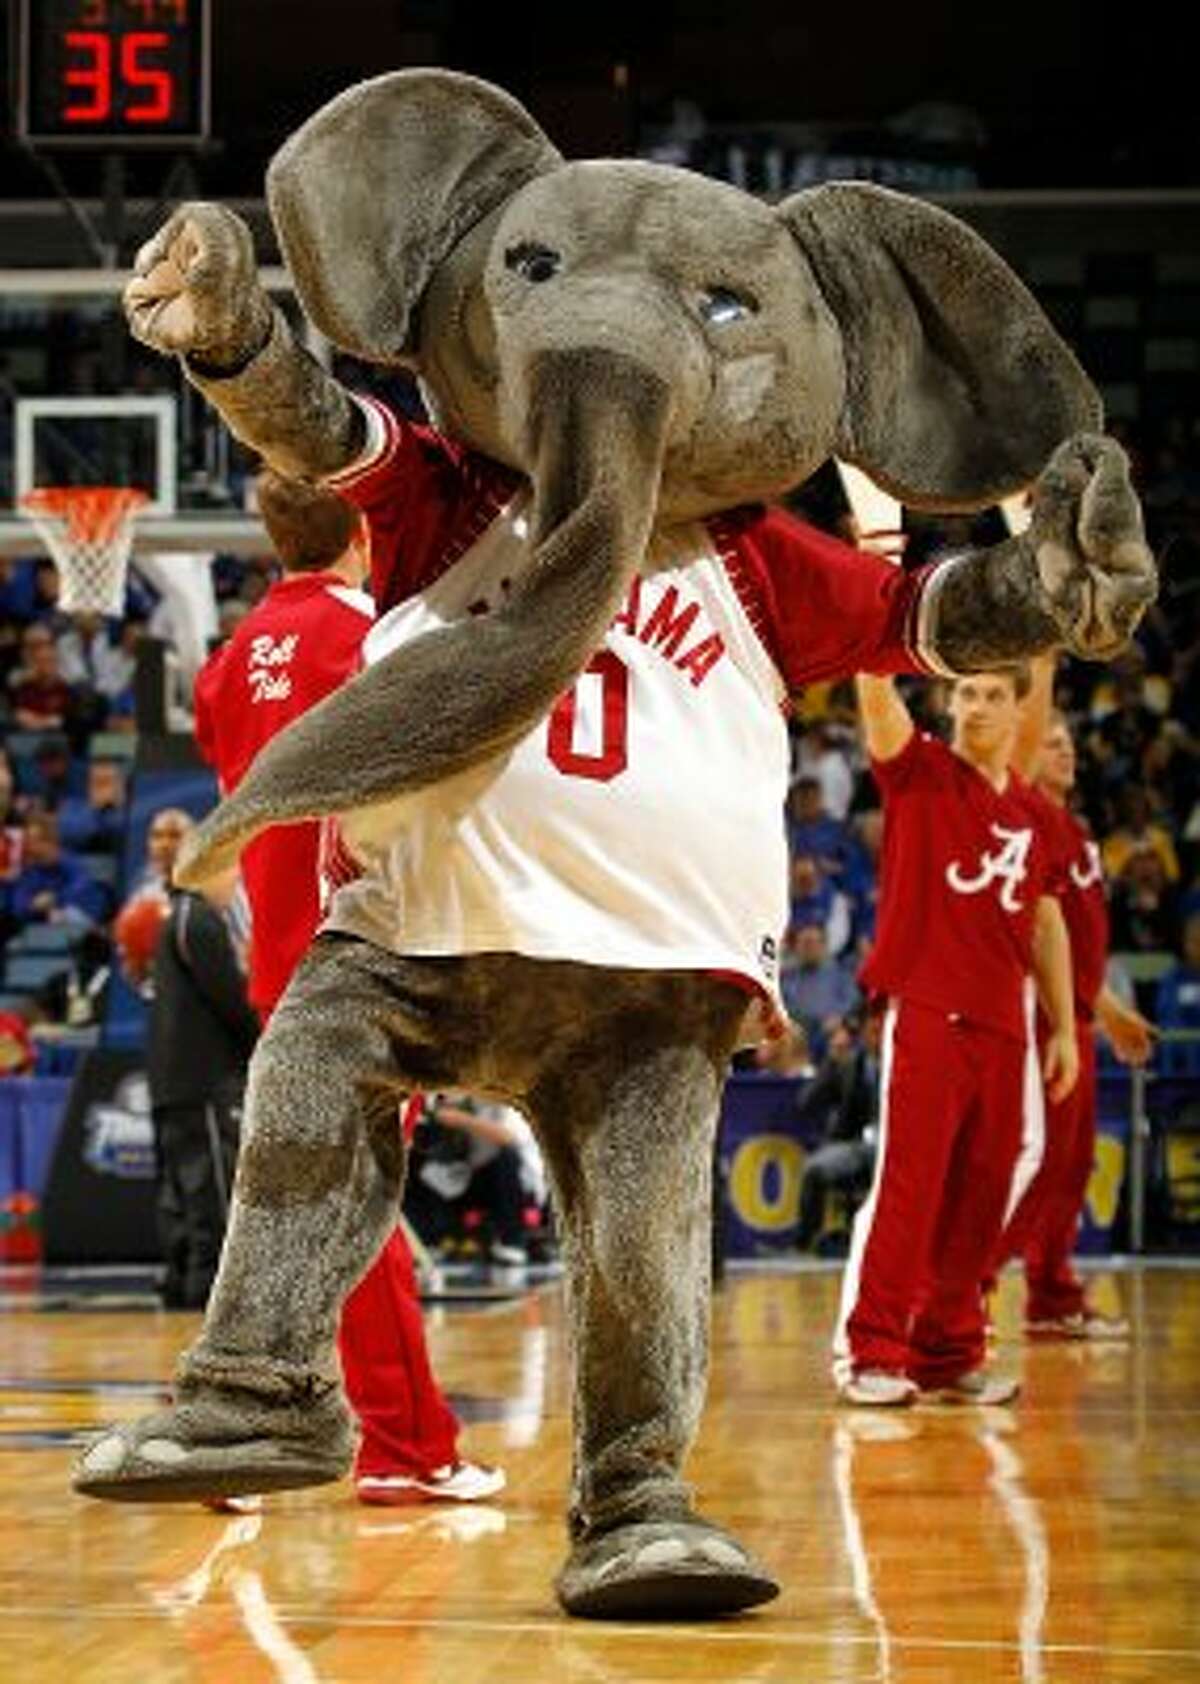 Big Al, the mascot for the Alabama Crimson Tide, seems to be having some sort of trunk malfunction. (Chris Graythen / Getty Images)